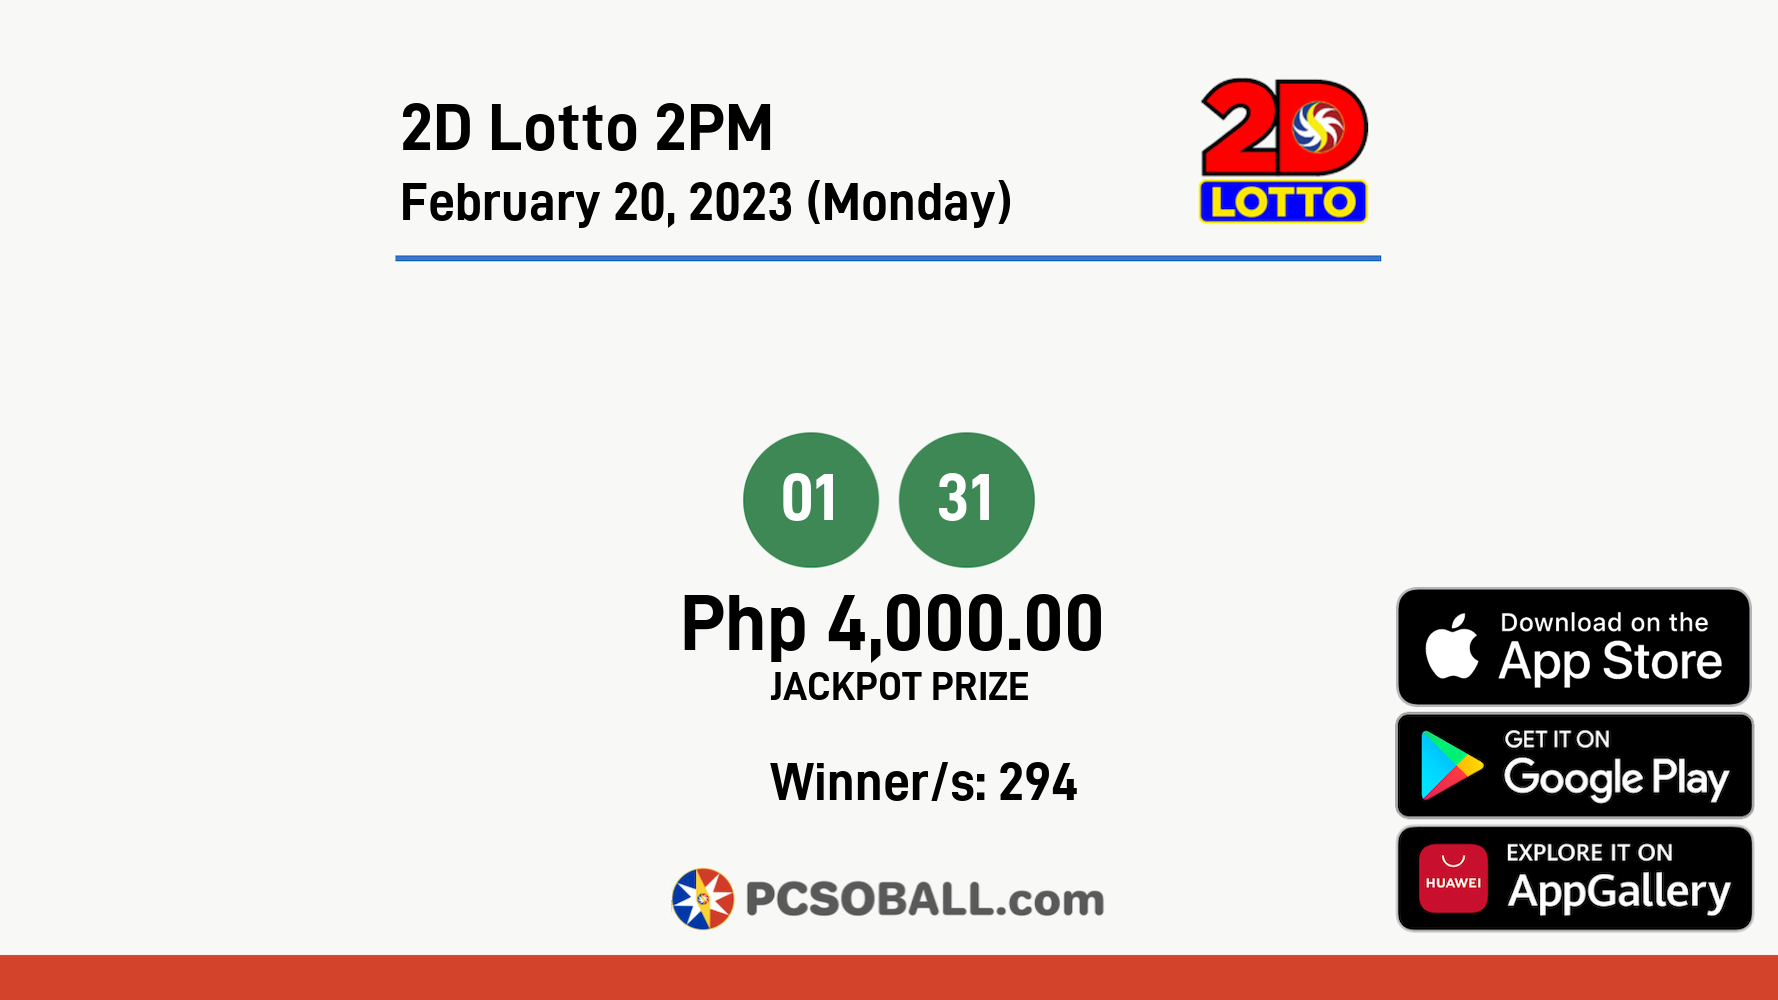 2D Lotto 2PM February 20, 2023 (Monday) Result